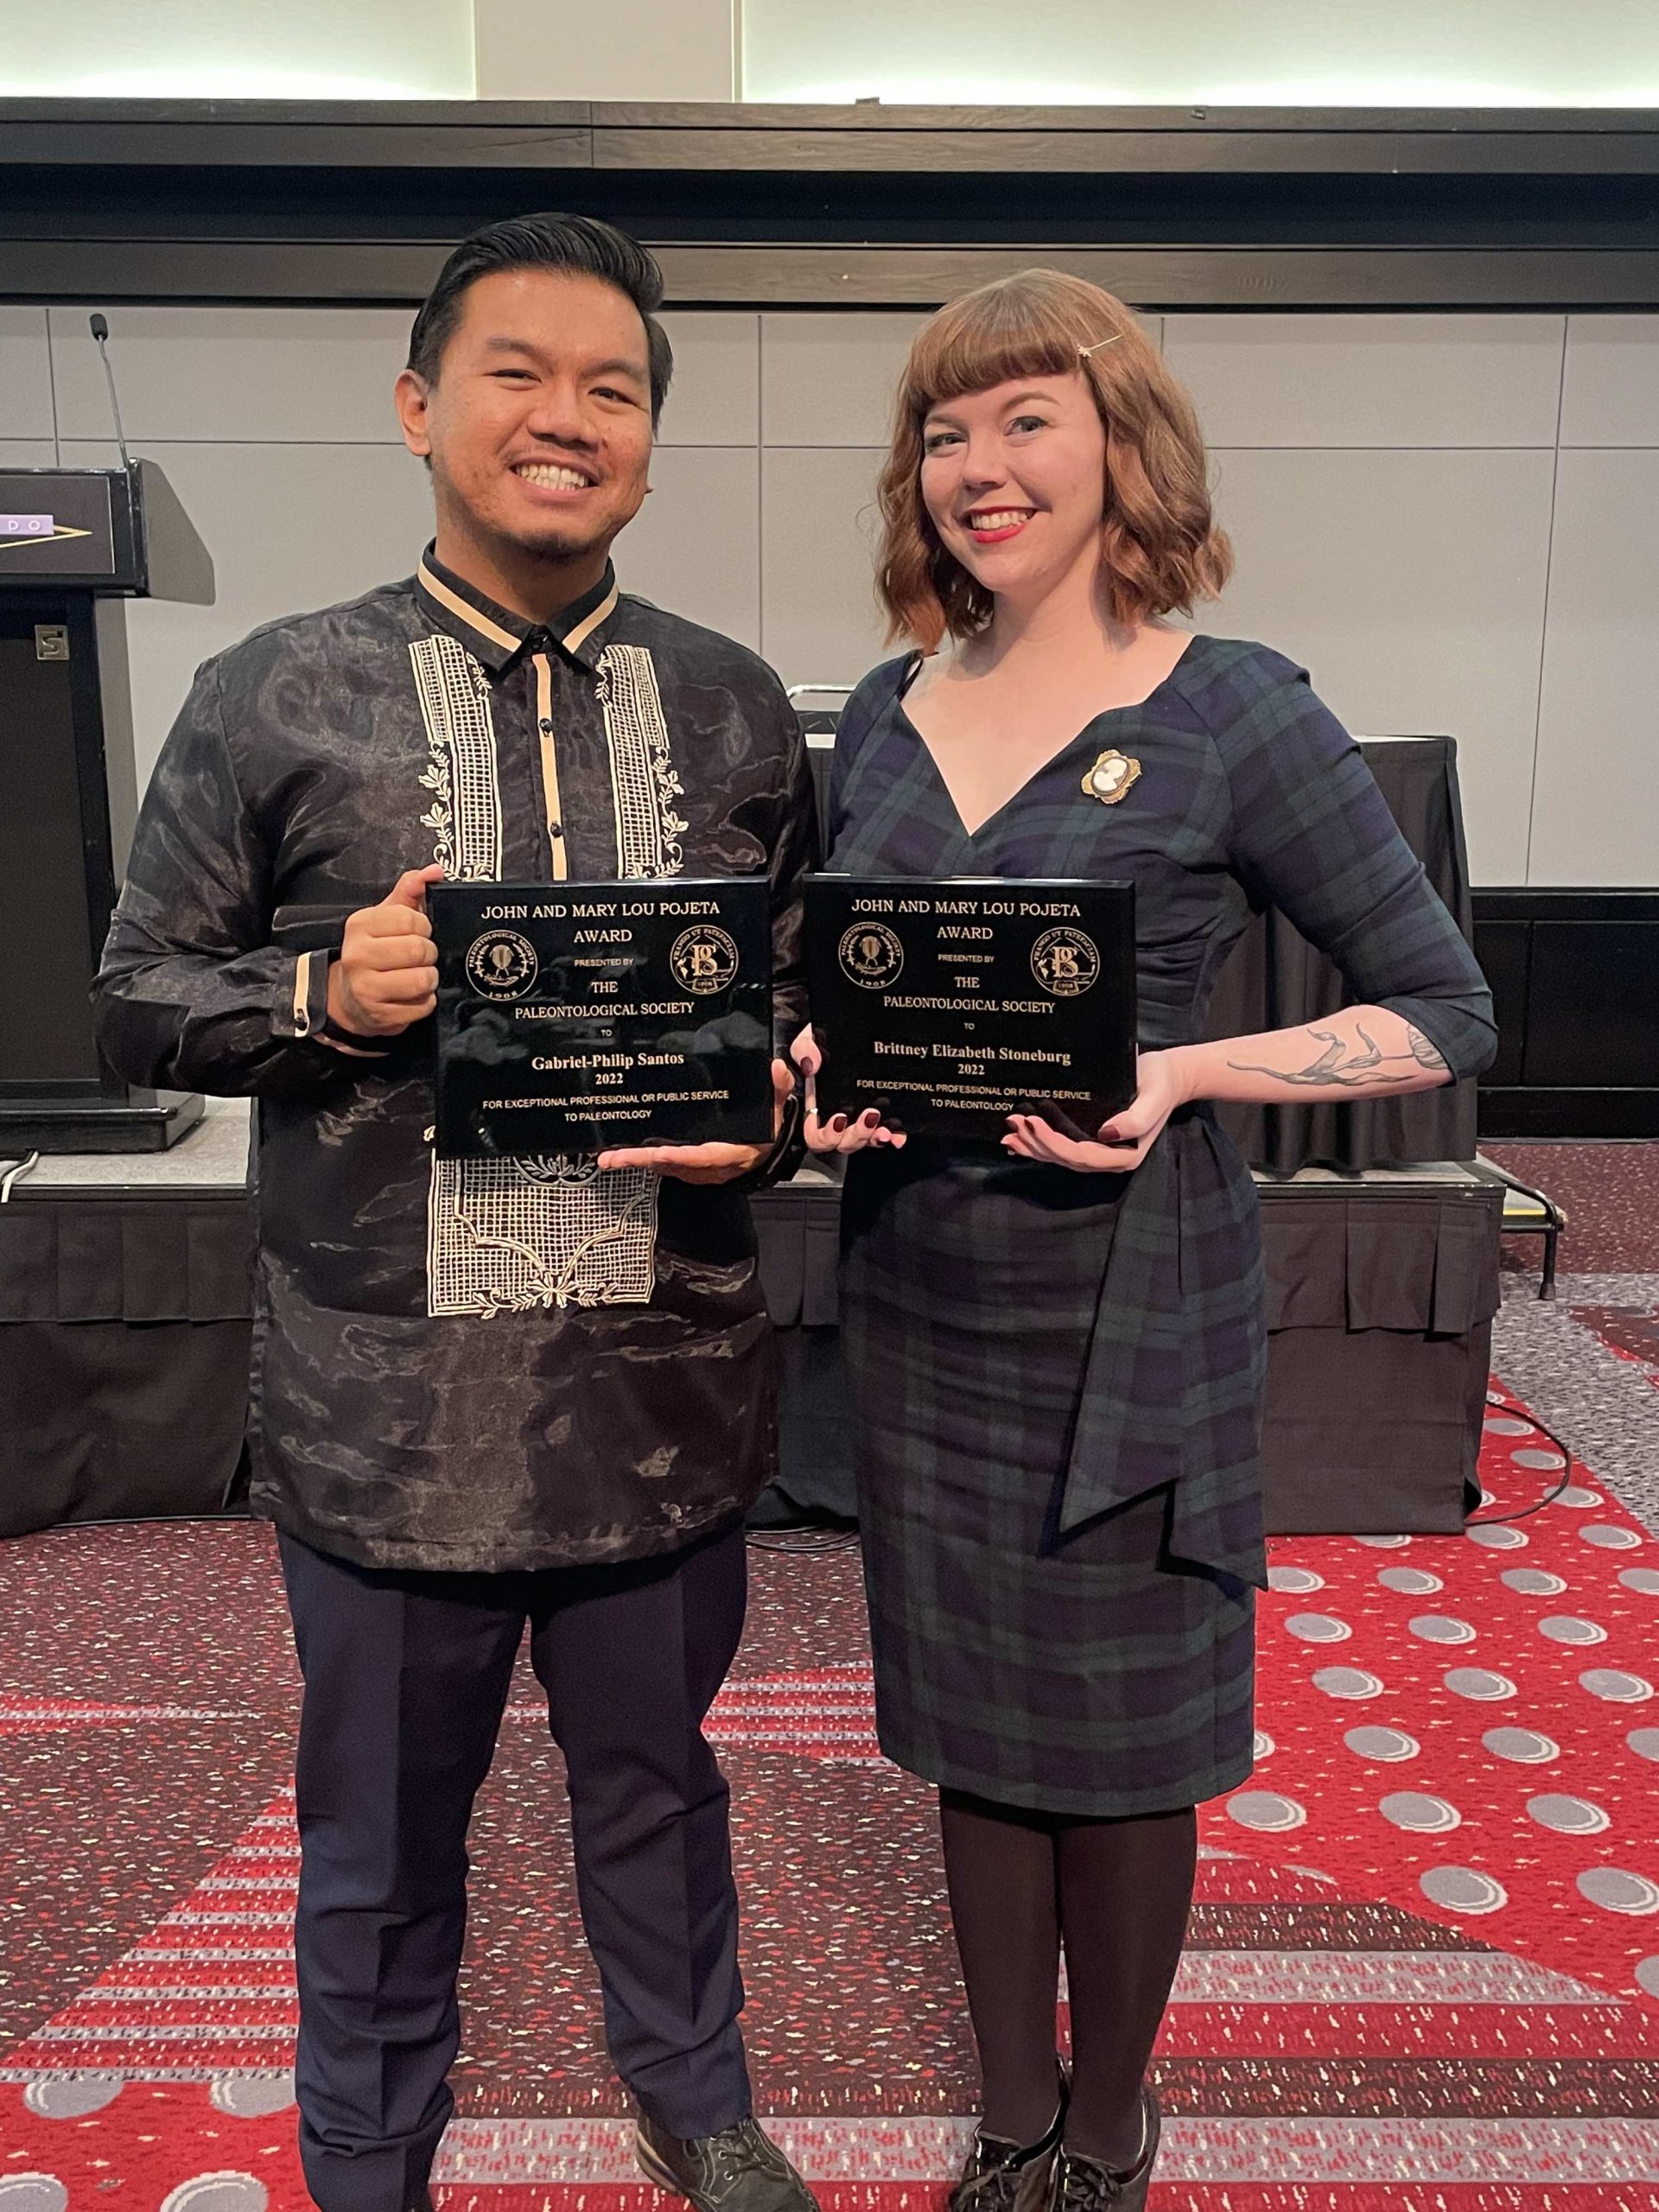 A filipino man and white woman pose next to each other holding award plaques.